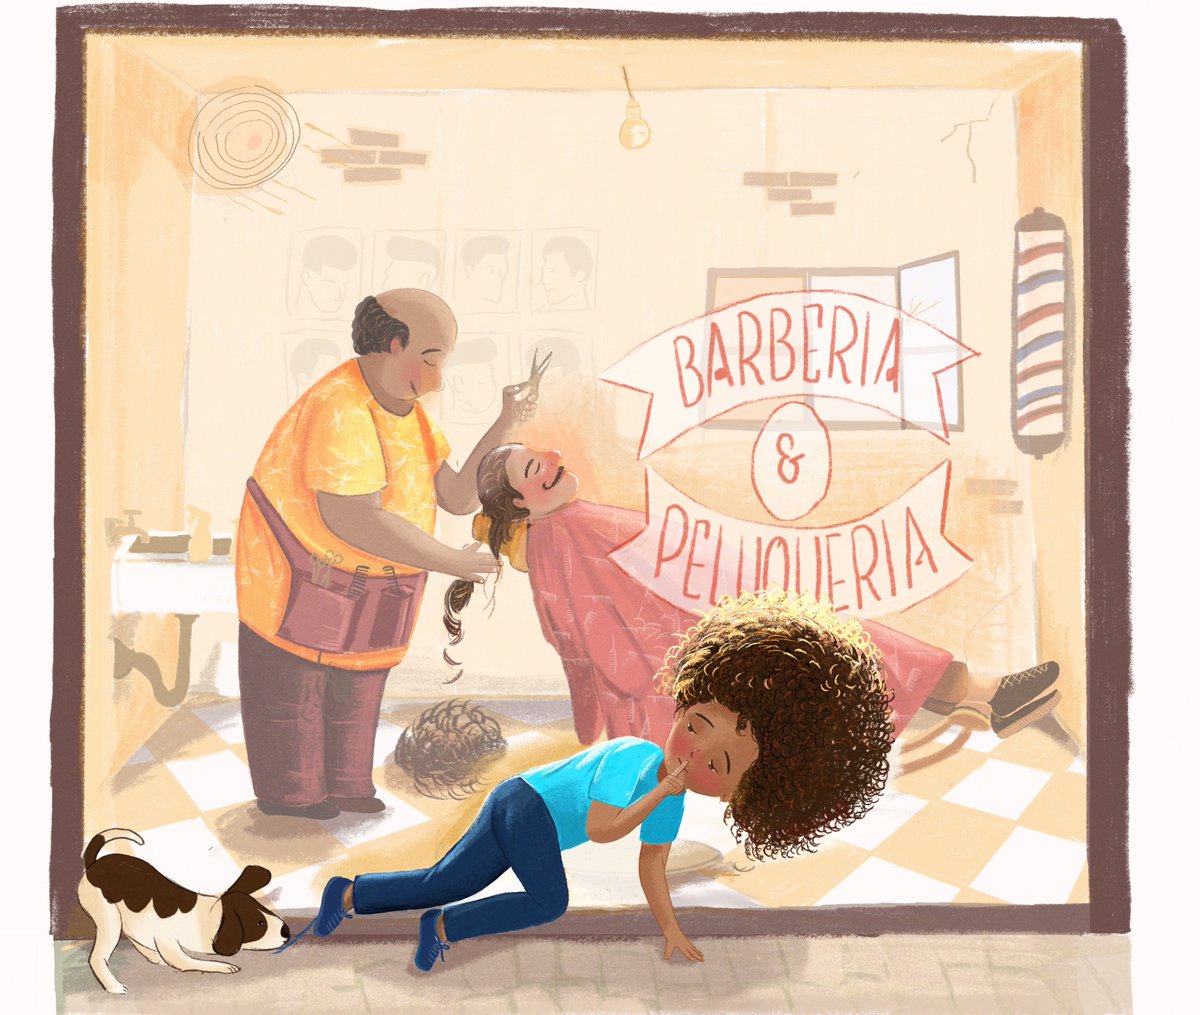 My submission for April’s SCBWI Draw This prompt - BARBERSHOP #SCBWIDrawThis #handlettering #childrensbookillust #illustration #picturebookillustrations #kidlit #kidlitillustration #illustrationart #illustration #childrensbooks #scbwiart #scbwi Special thanks to @IlloChat